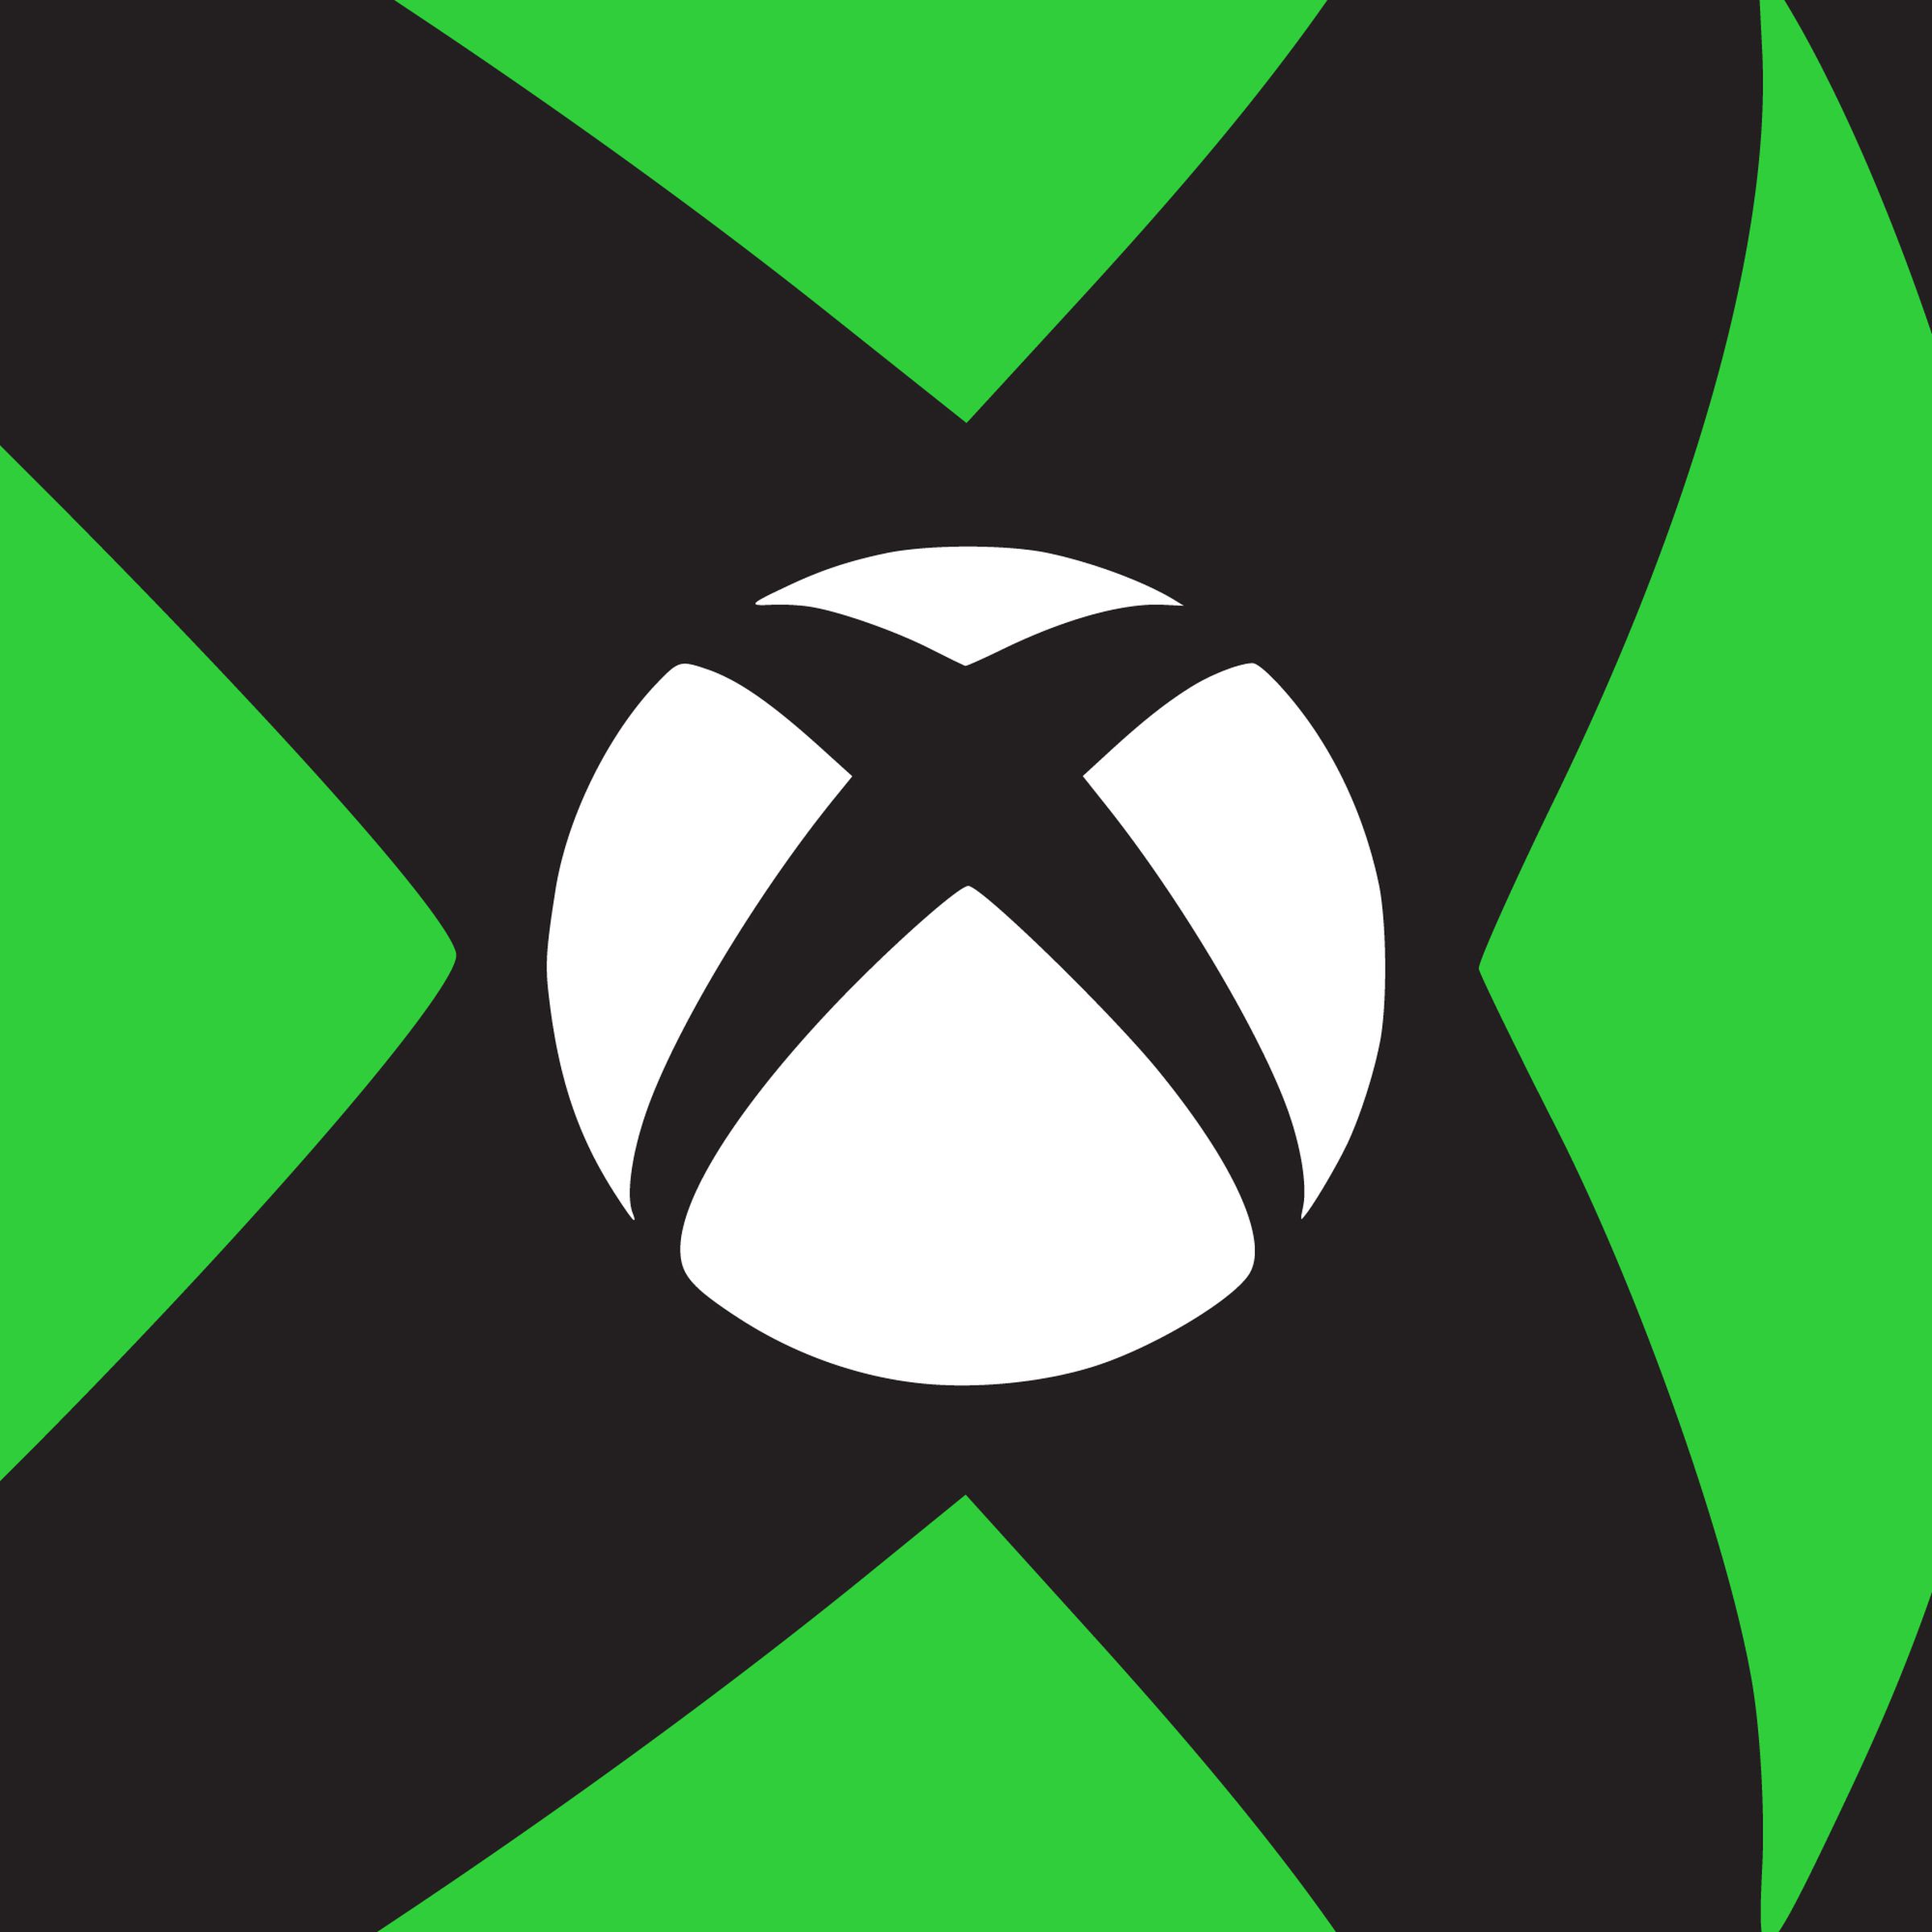 An illustration of the Xbox logo.